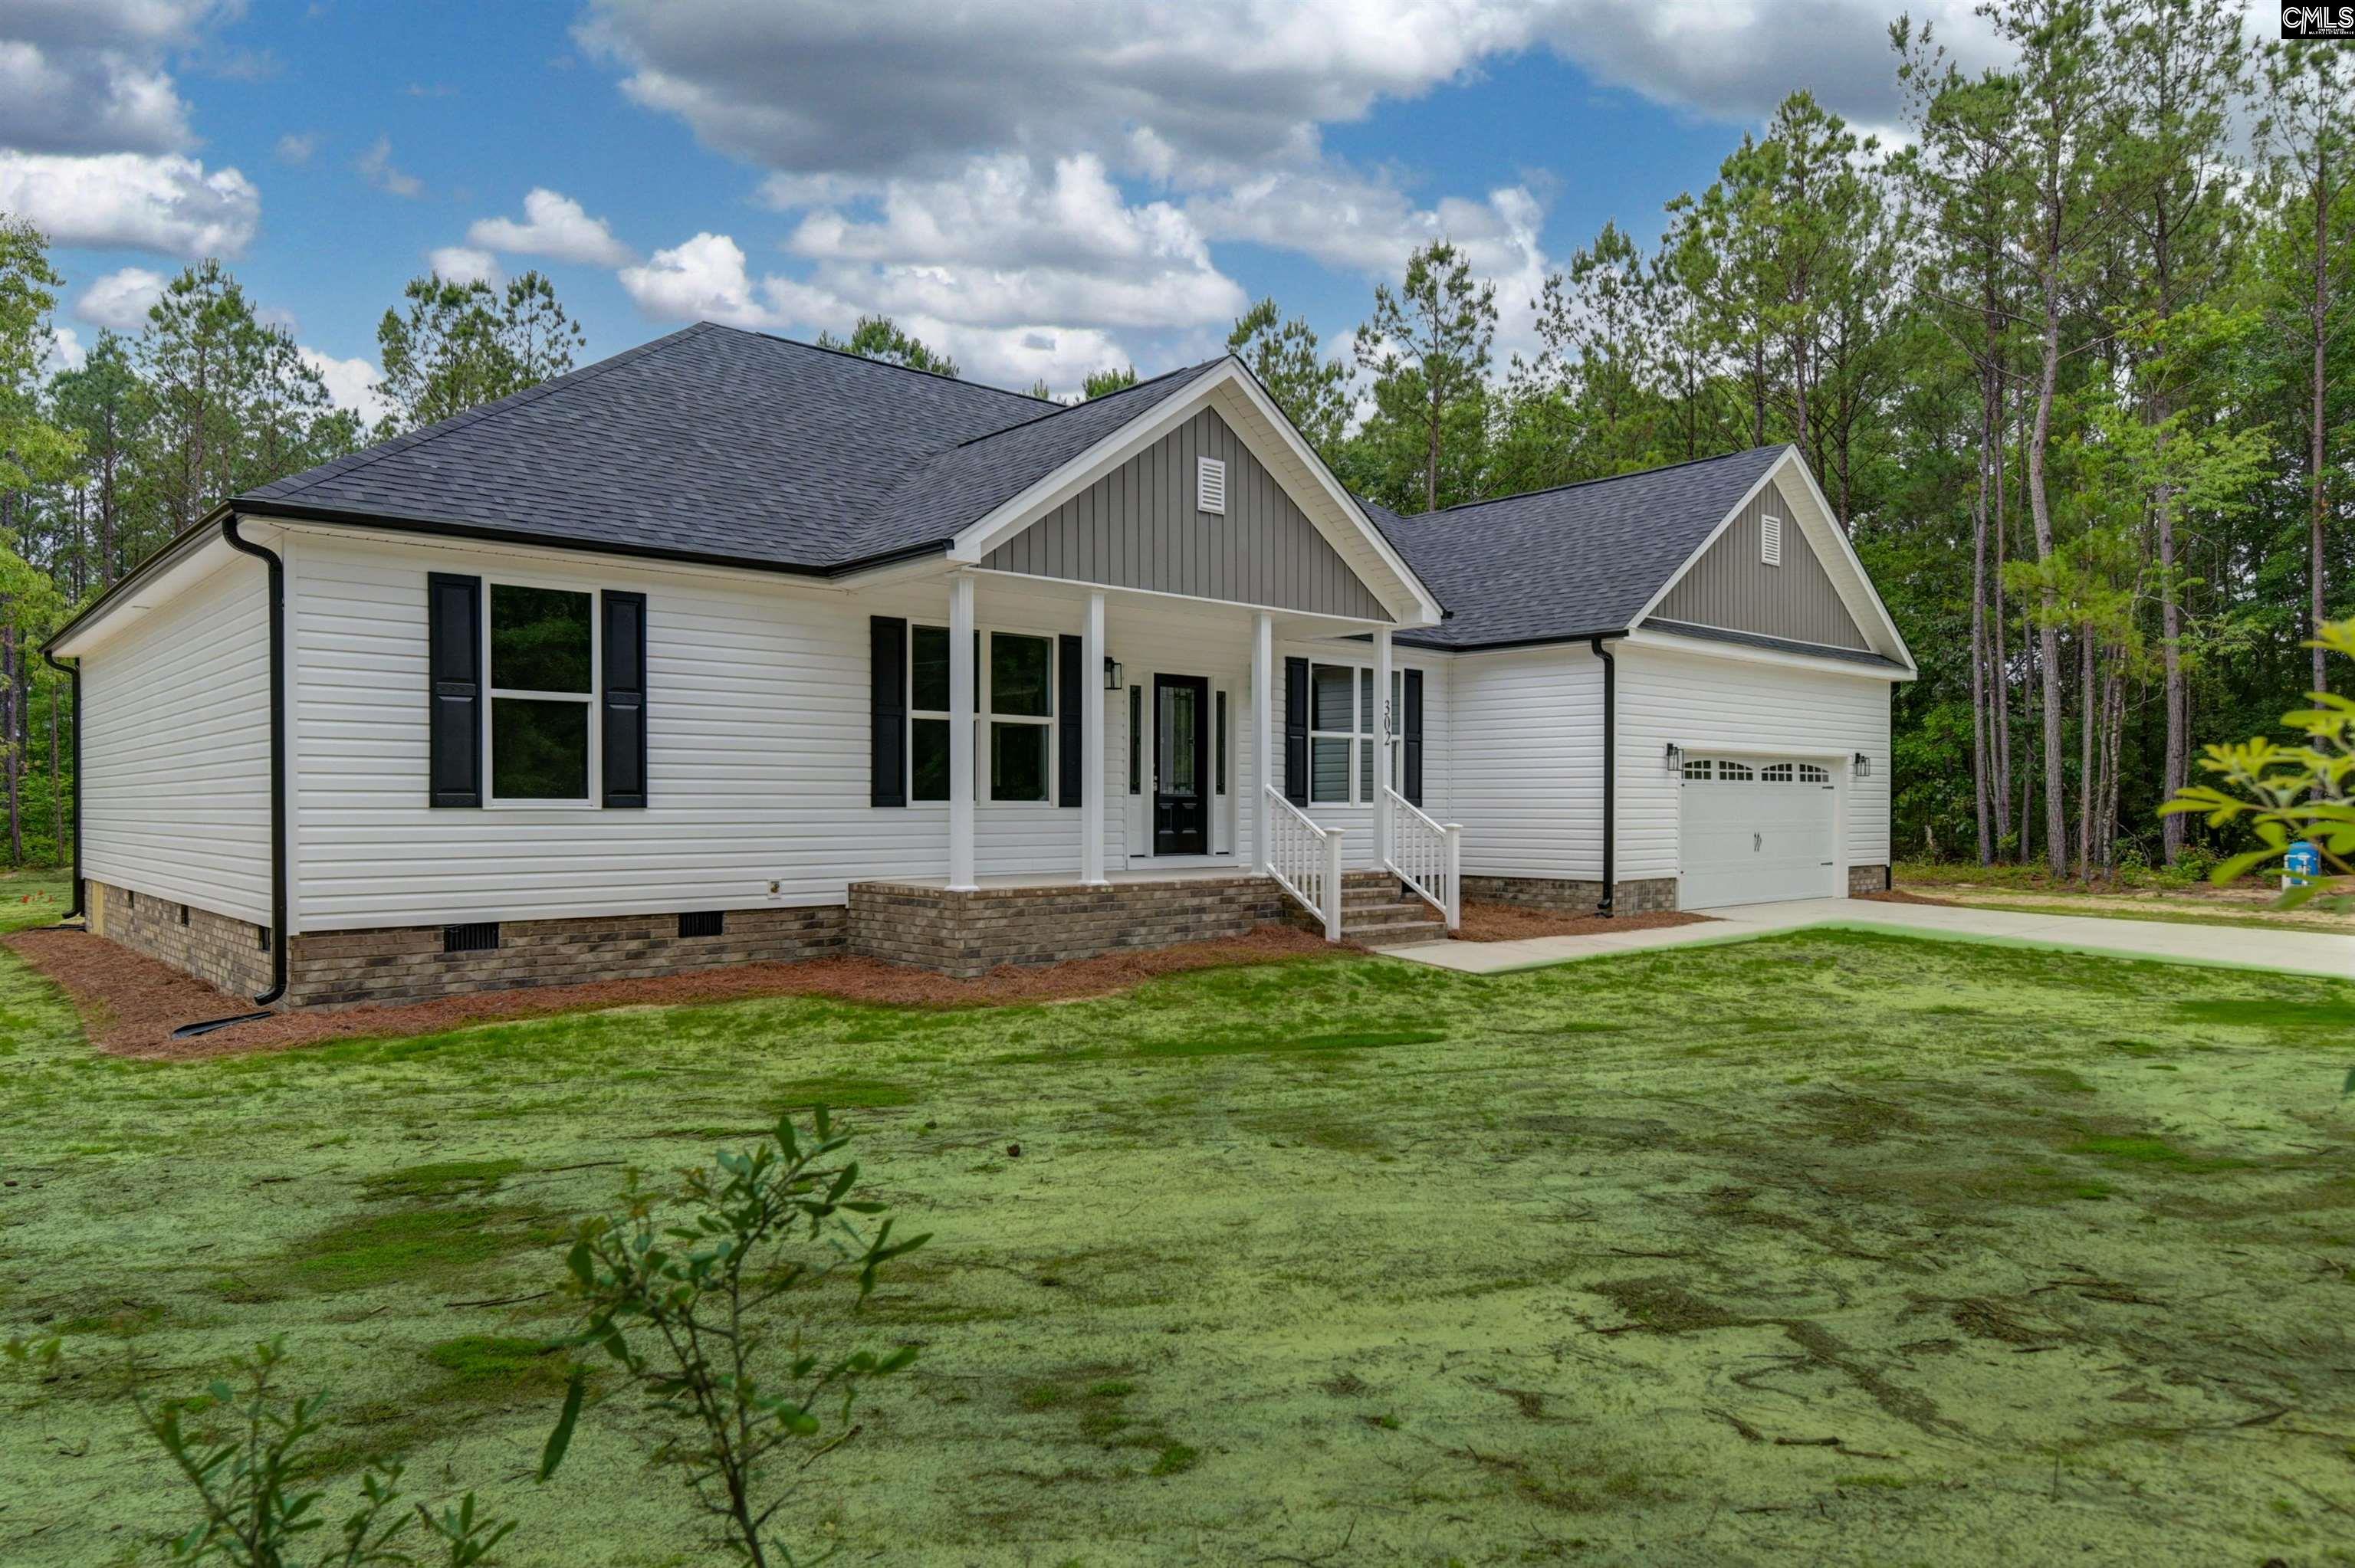 302 Kennerly Road, North, SC 29112 Listing Photo 2